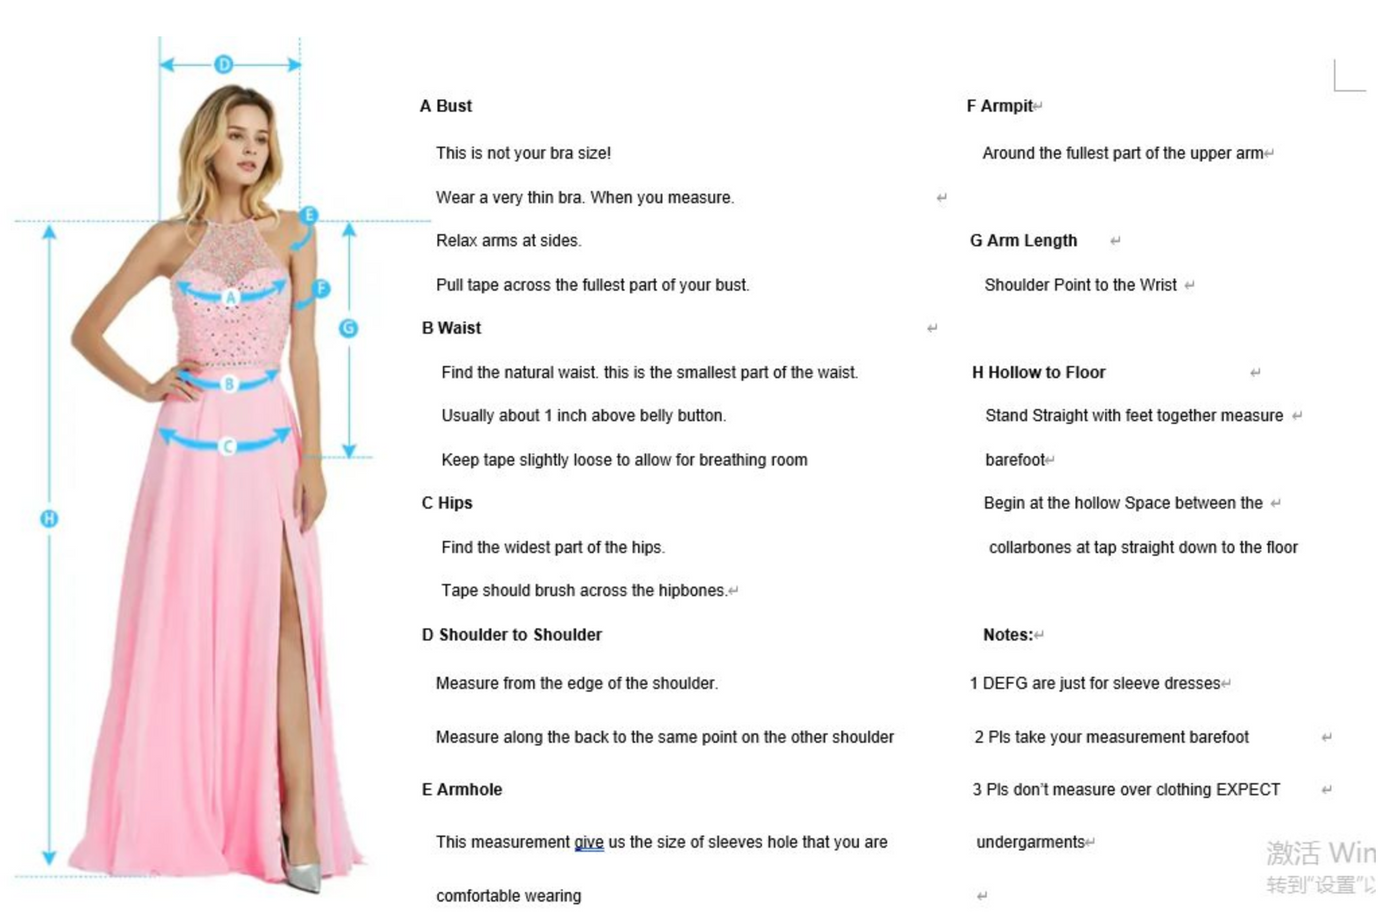 The measurements of a woman in a Bergamot Bridal Plunging V-Neck A-Line Ball Gown Bridal Gown.